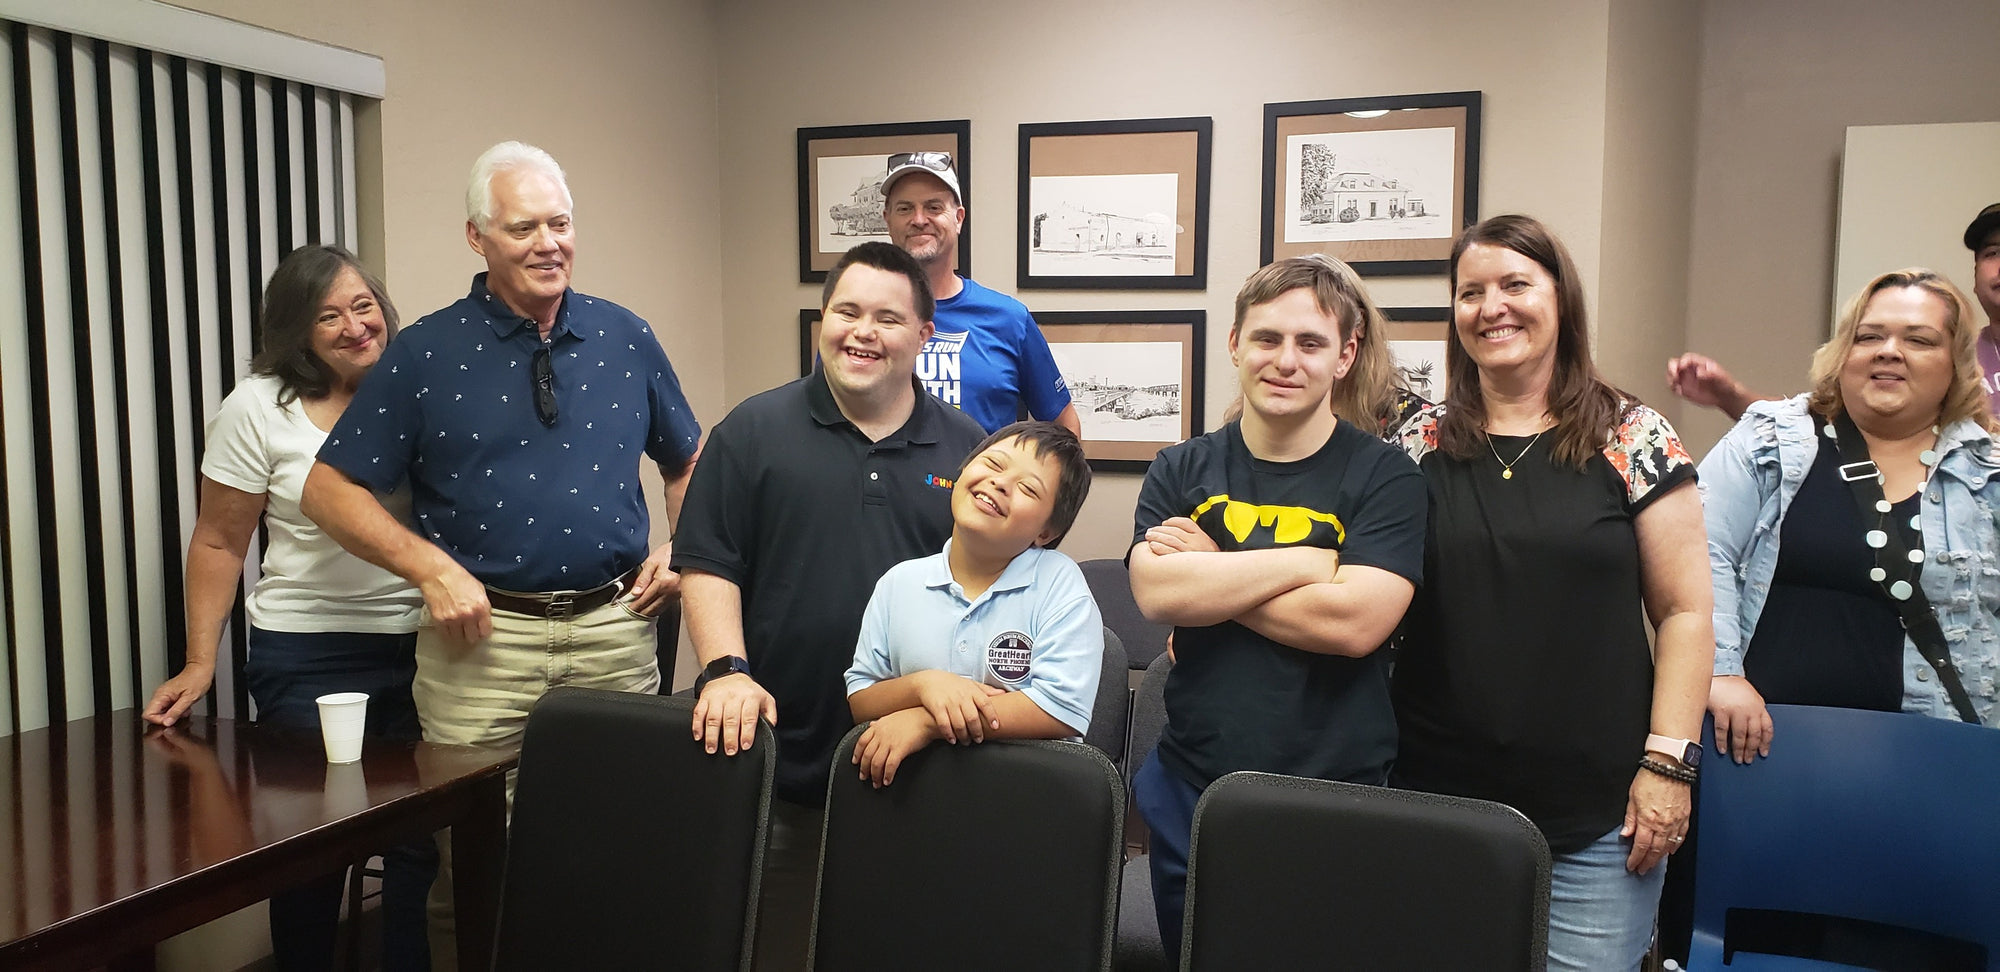 John and Mark X. Cronin Meet with the Down Syndrome Network Arizona